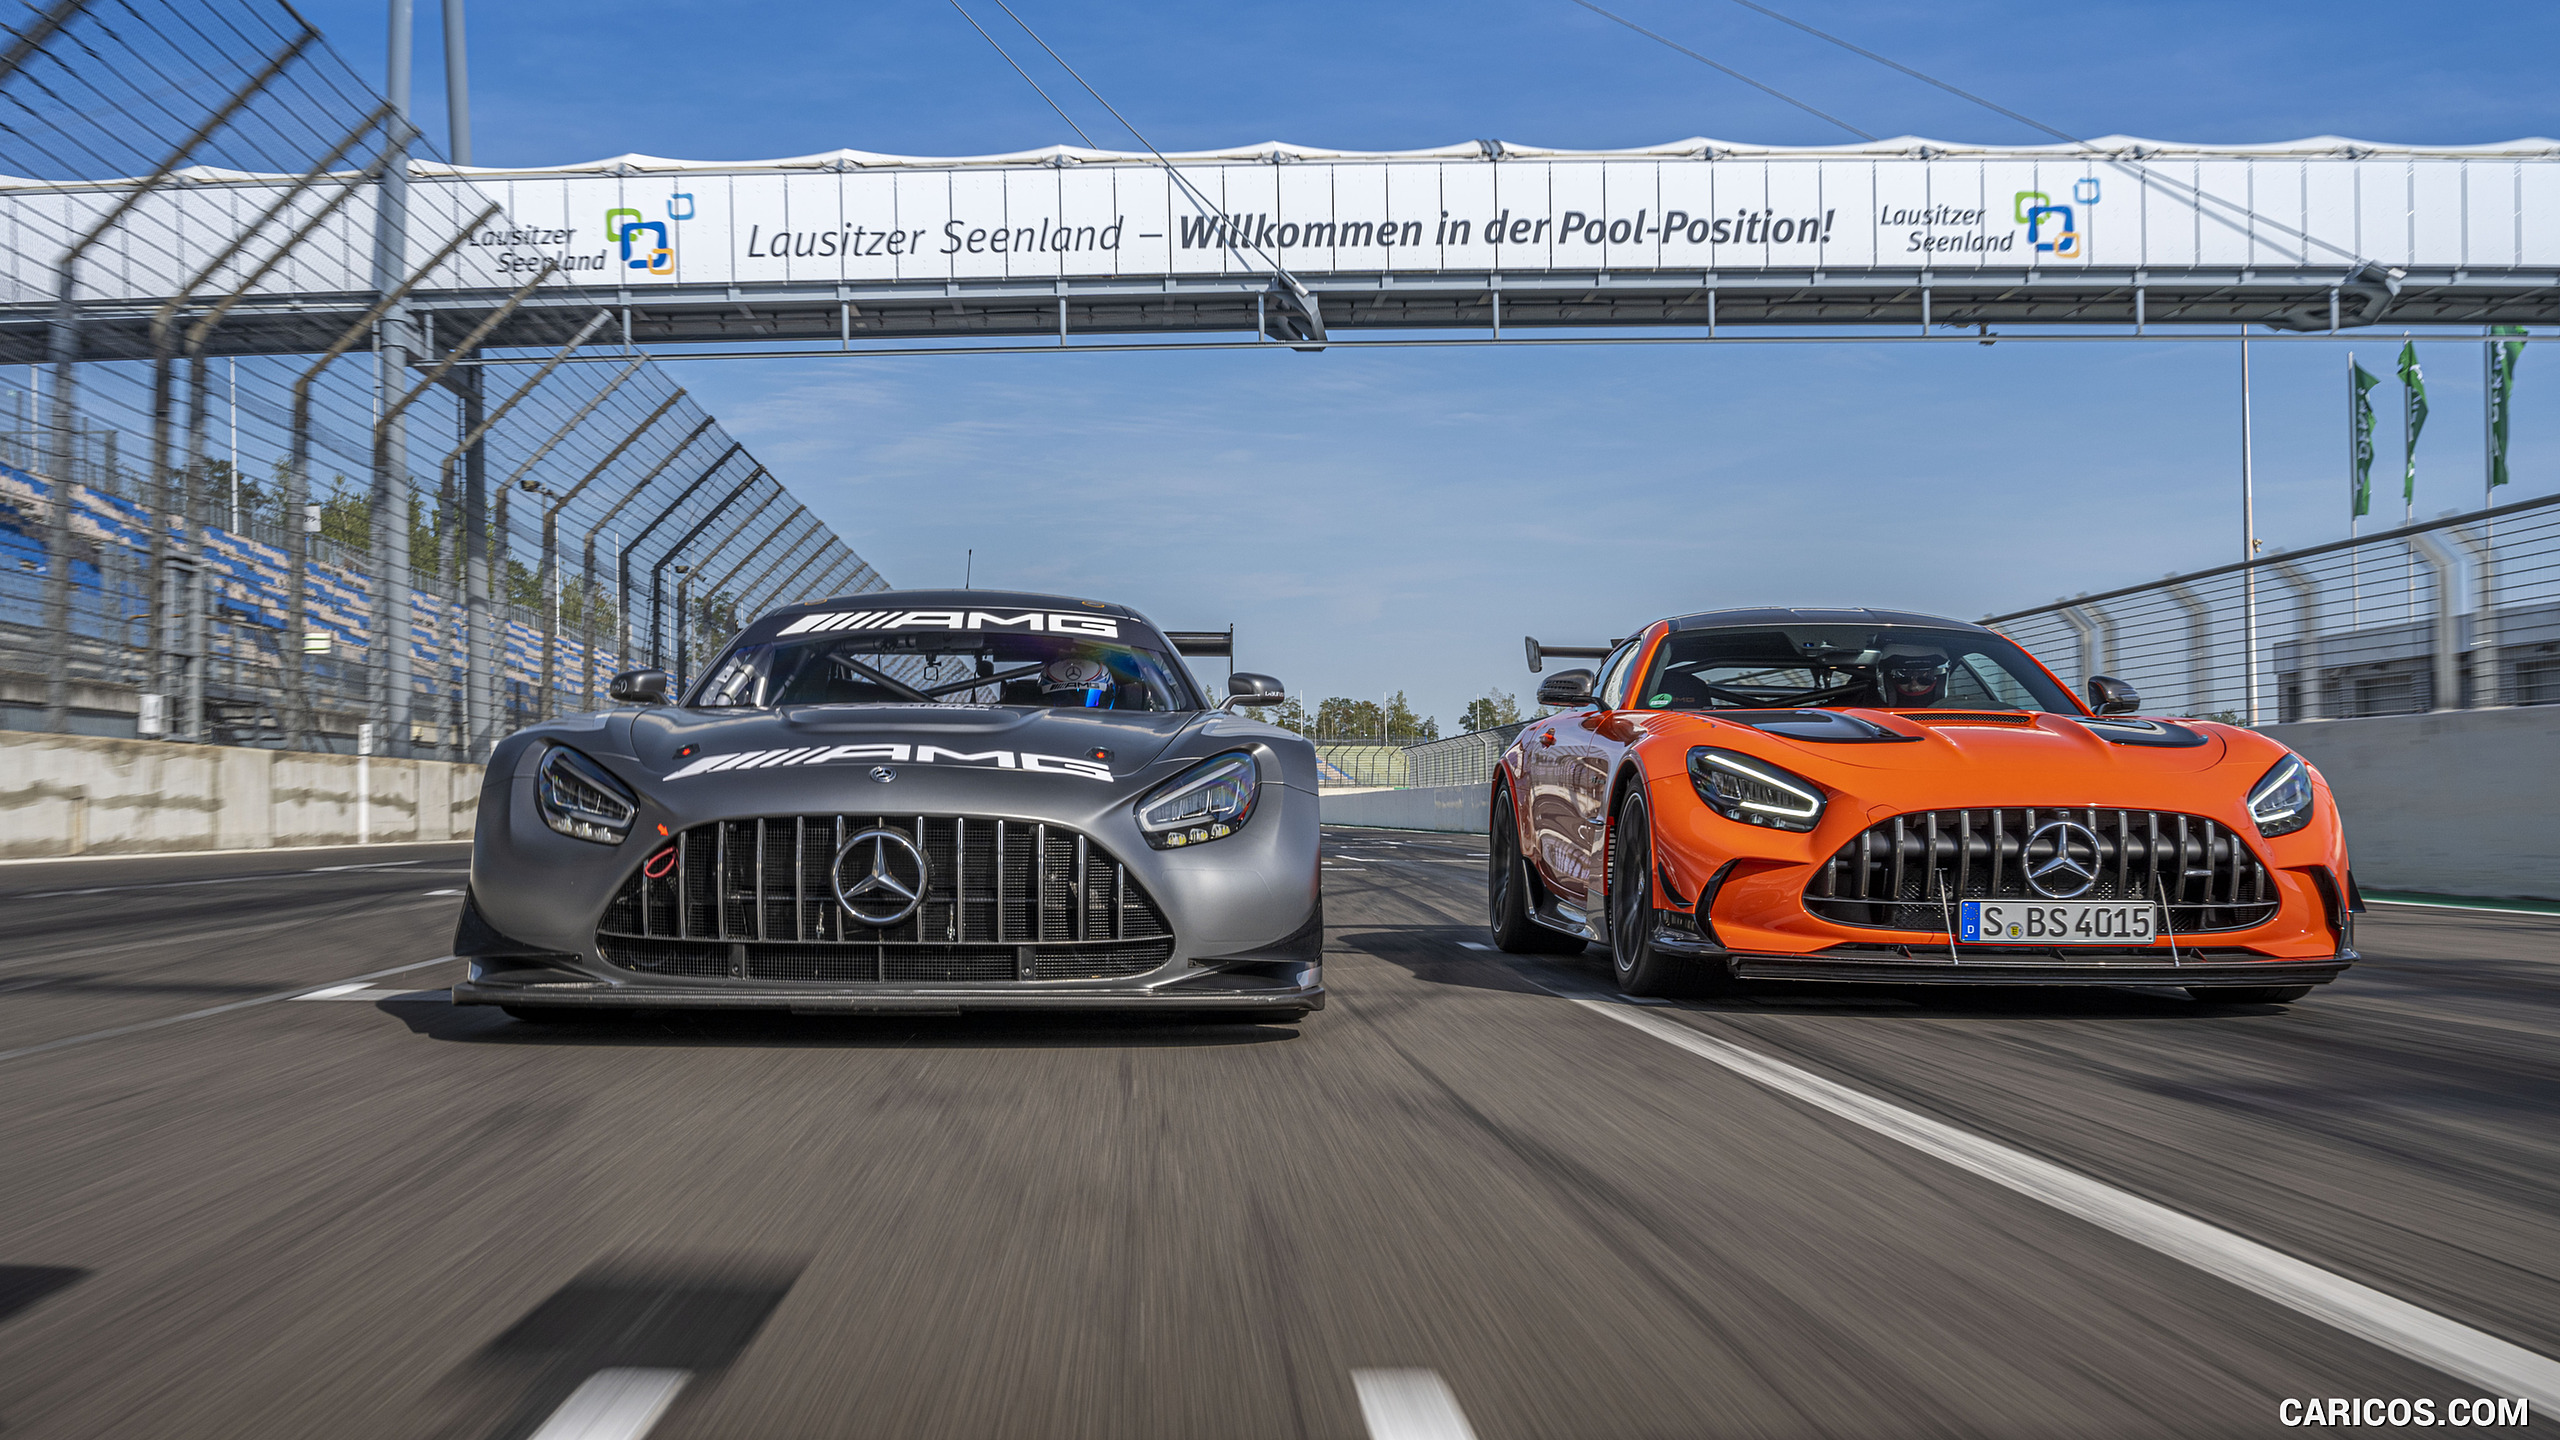 2021 Mercedes-AMG GT Black Series (Color: Magma Beam) and AMG GT3 Racing Car, #143 of 215